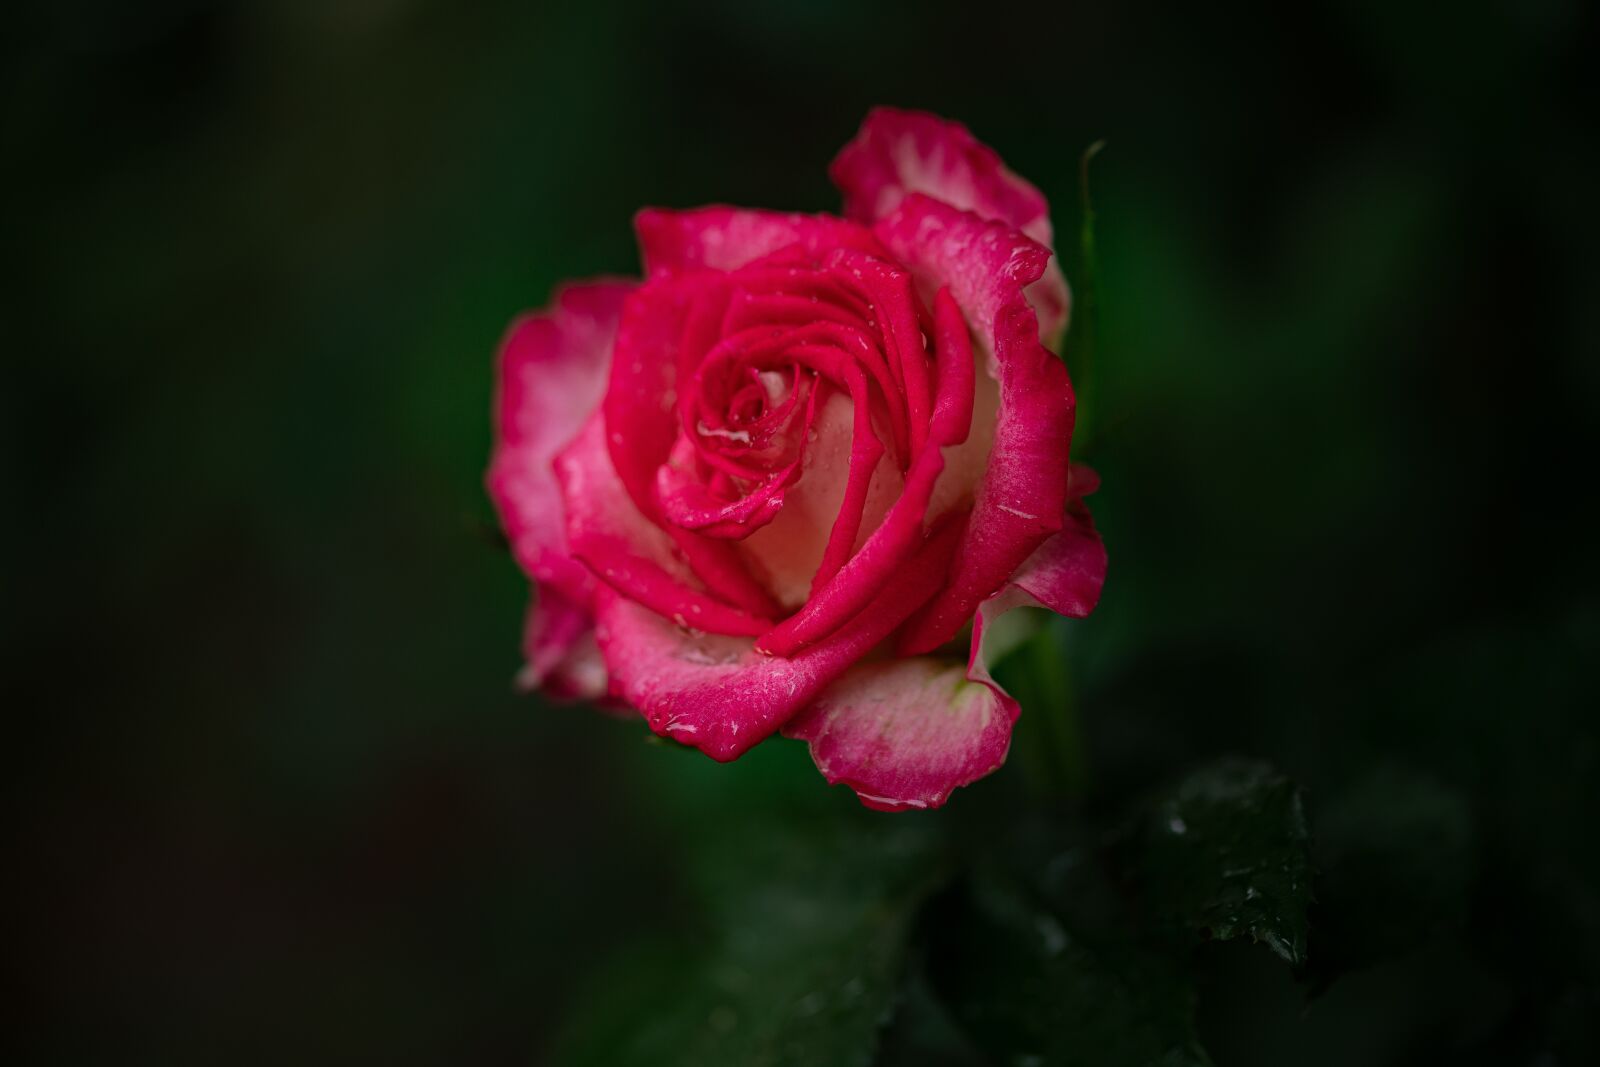 105mm F2.8 sample photo. Roses, flower, nature photography